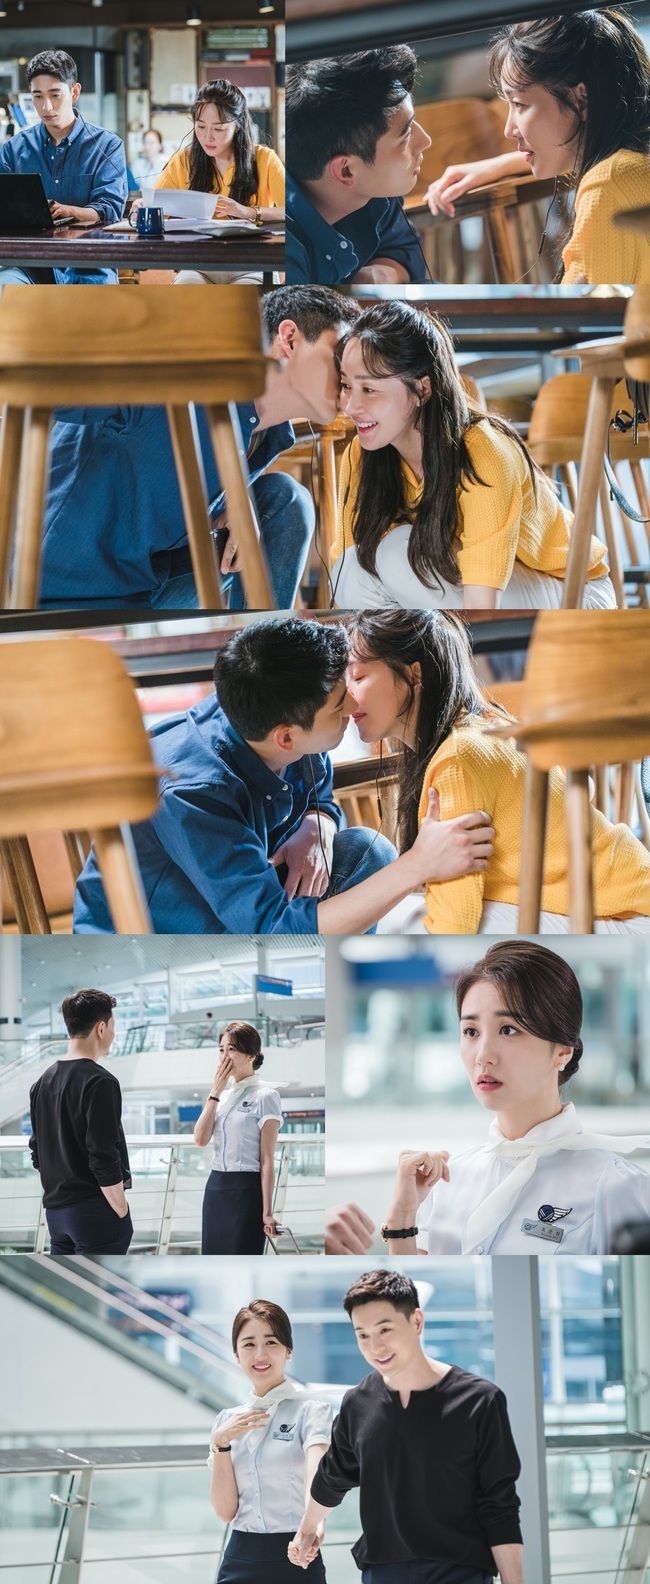 Postpartum care centers Uhm Ji-won, Park Ha-suns past love days have been revealed.In the fifth episode of TVNs Postpartum care centers (director Park Soo-won, playwright Kim Ji-soo, production tvN and Lamon Rain, and 8 episodes), which will be broadcast on November 16, the story of mothers who are in trouble about the slowly changing couple after childbirth is drawn.In the play, Hyun-jin received plenty of comfort and love from her younger husband, Do-yoon, who is a wife fool, whenever everything was difficult because of poor labor after her first birth.In the third birth, Eunjung (Park Ha-sun), a child care worker, was interviewed with her professional golfer husband Sun Woo (Jung Sung-il), and seemed perfect on the outside, but felt lonely somewhere.However, in the last broadcast, the changed behavior of Doyun attracted attention.Unlike usual, I sleep with Hyunjin, and when I sleep, I have secretly exchanged messages with my companys juniors, and I have a secret that my wife should not know.Therefore, it is expected that the worries of mothers about the marital relationship that changes after the birth of the baby will cause the sympathy of the viewers without fail, while the curiosity about what happened to Hyun Jin and Do Yun, who were full of love, and the Eunjung couple is added.Among them, the still shows the scene of Date from the love affair of Hyunjin and Eunjung, and the date of Hyunjin and Doyun is a thrilling explosion itself.At one point, they exchanged hot eyes with each other under the table, and then Doyun is kissing Hyunjin with a surprise.And the last shows the end of the romantic atmosphere with a dizzying kiss.The three-stage skinship that leads to the eyes, balls, and mouths further doubles the excitement and makes the hearts of those who see Hyunjin and Doyuns sweet chemistry thrill.Eunjungs past is a series of surprises, the most surprising point of all that she was a stewardess.Because of this, the location of the date of Eunjung is the airport, and the appearance of perfect stewardess uniforms also catches the eye.On the way back from the flight, following the expression of Eunjung surprised by the surprise appearance of Sun Woo, he pulls the carrier instead and holds hands and realizes that there were times when the two people were hotly loved by the Eunjung couple.I wonder what real and realistic worries mothers will have about the changed marital relationship and the timing after childbirth, which is a turning point between the couple.Park Su-in